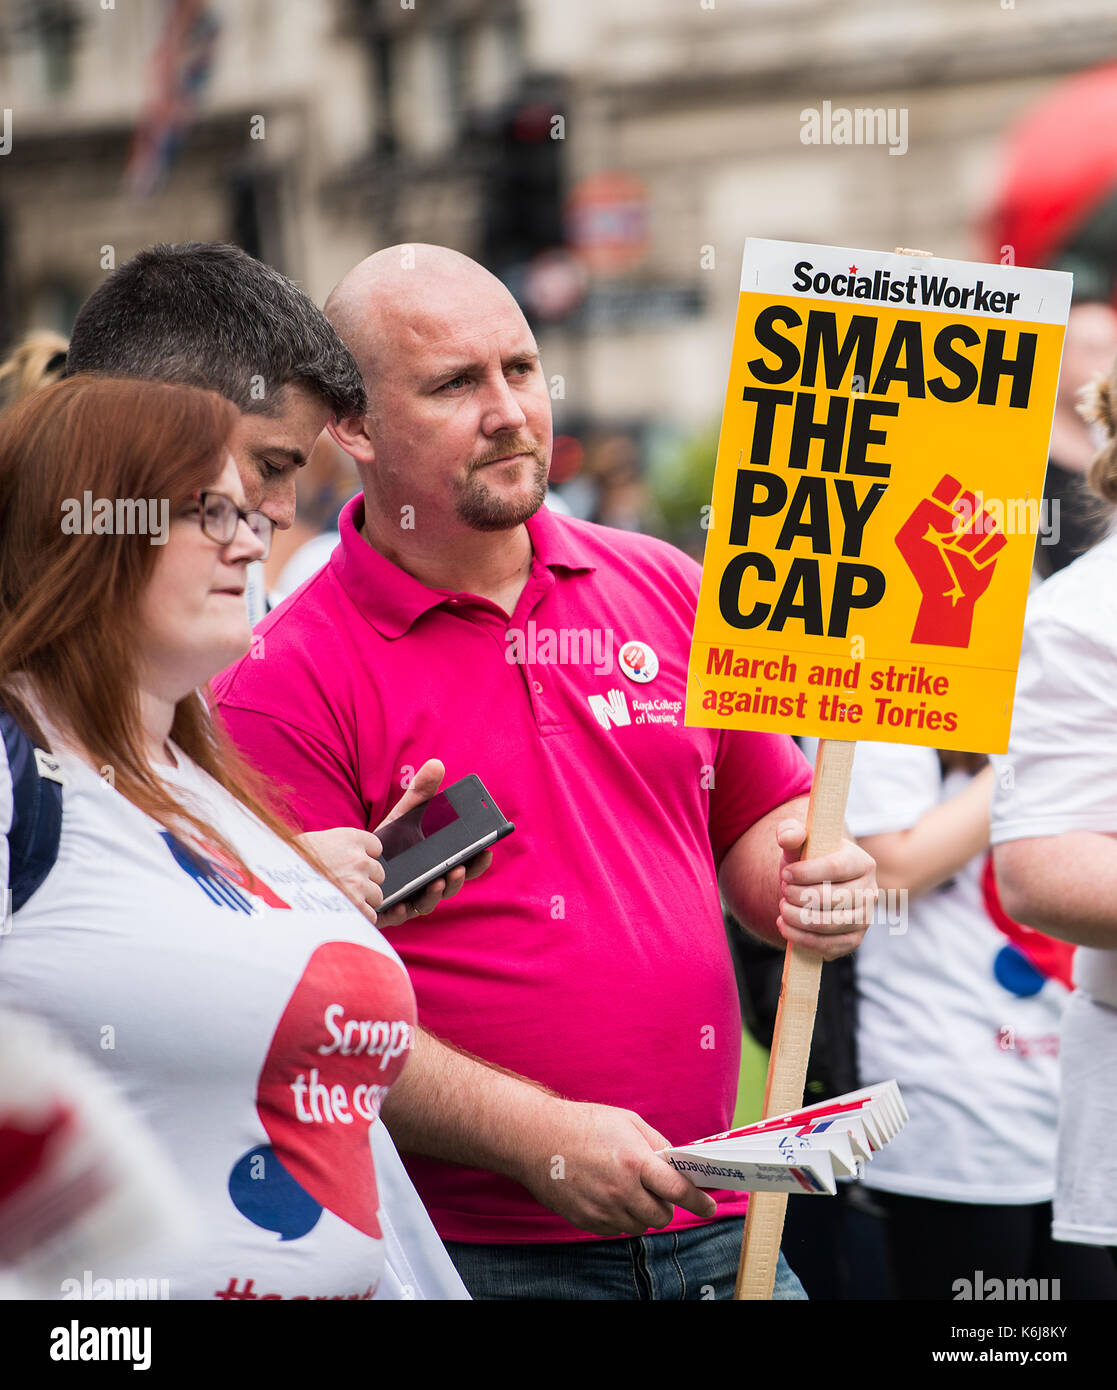 Scrap The Cap protest - Thousands of nurses gather at Parliament Square, London, to campaign against the government's 1% public sector pay cap. Stock Photo